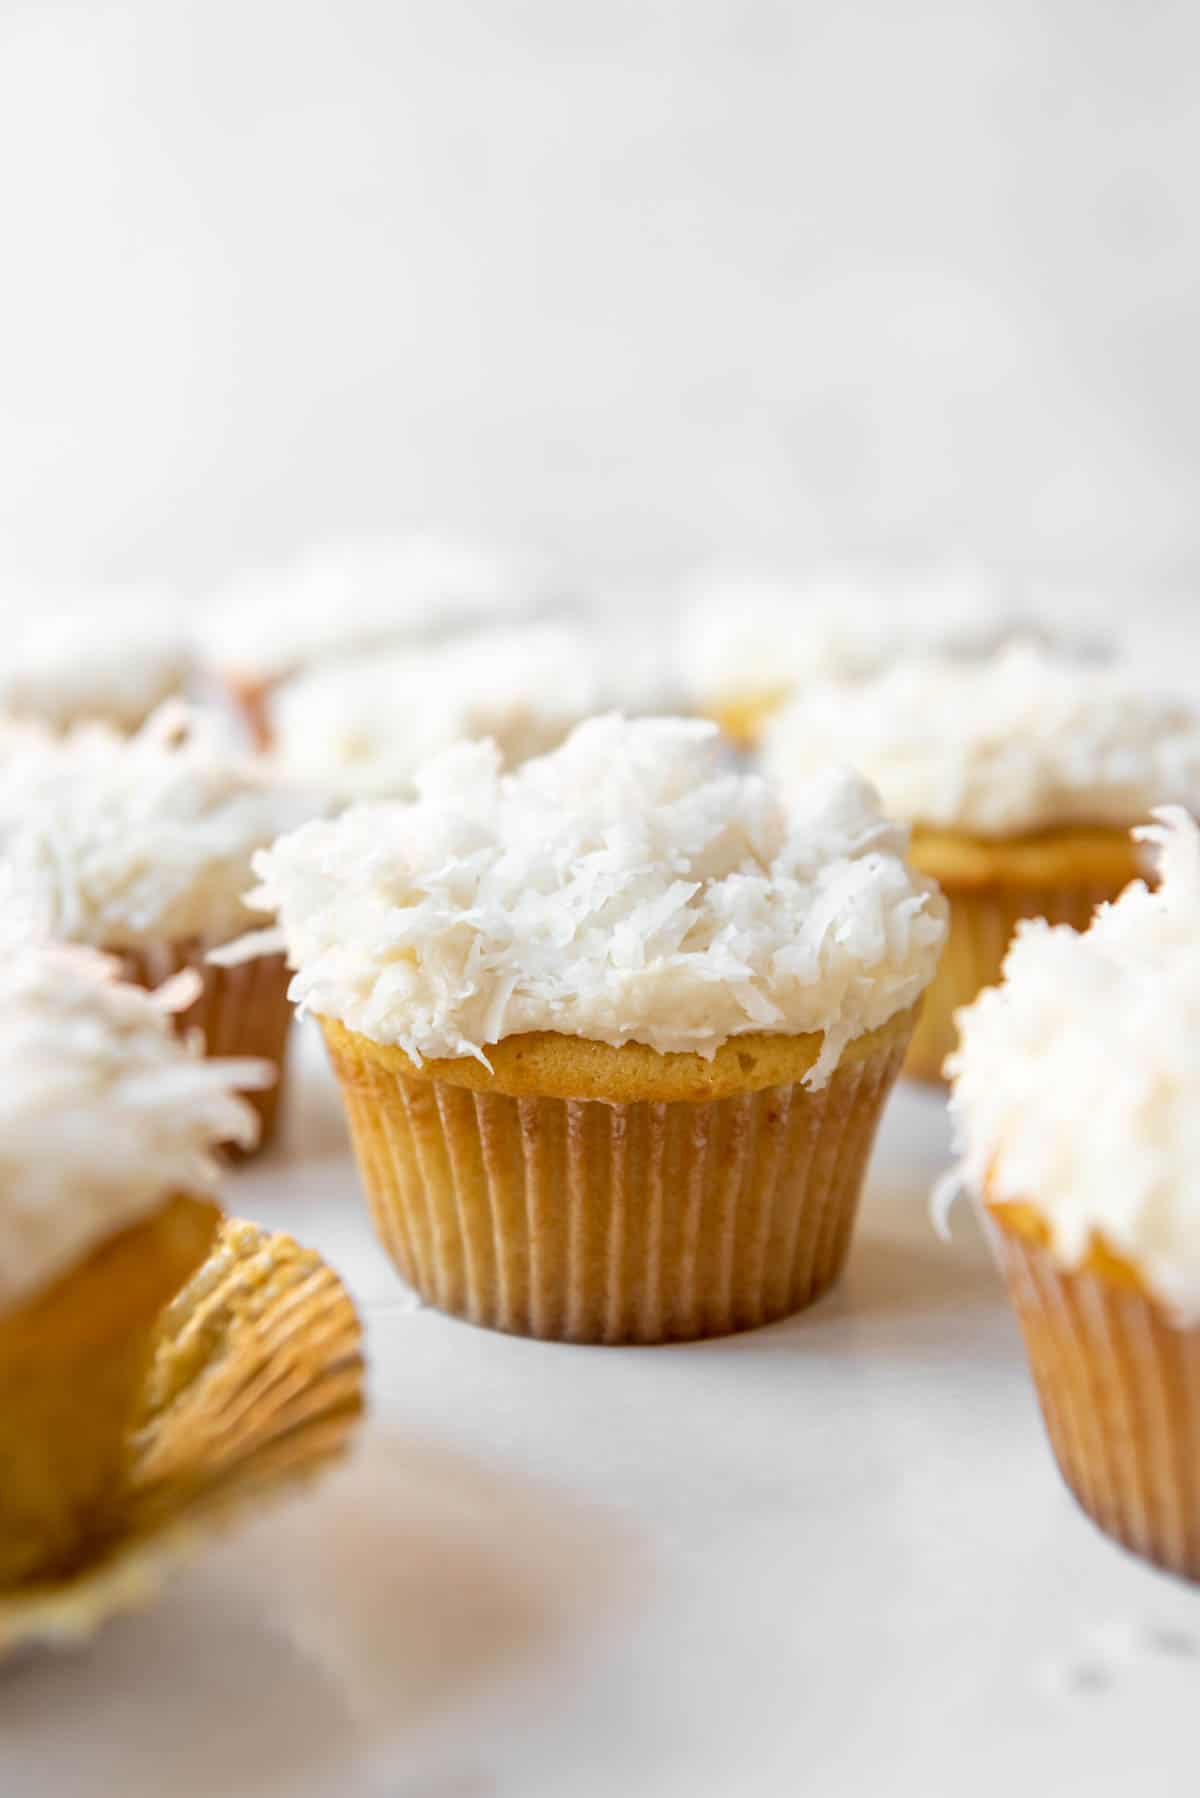 Homemade coconut cupcakes topped with sweetened shredded coconut.